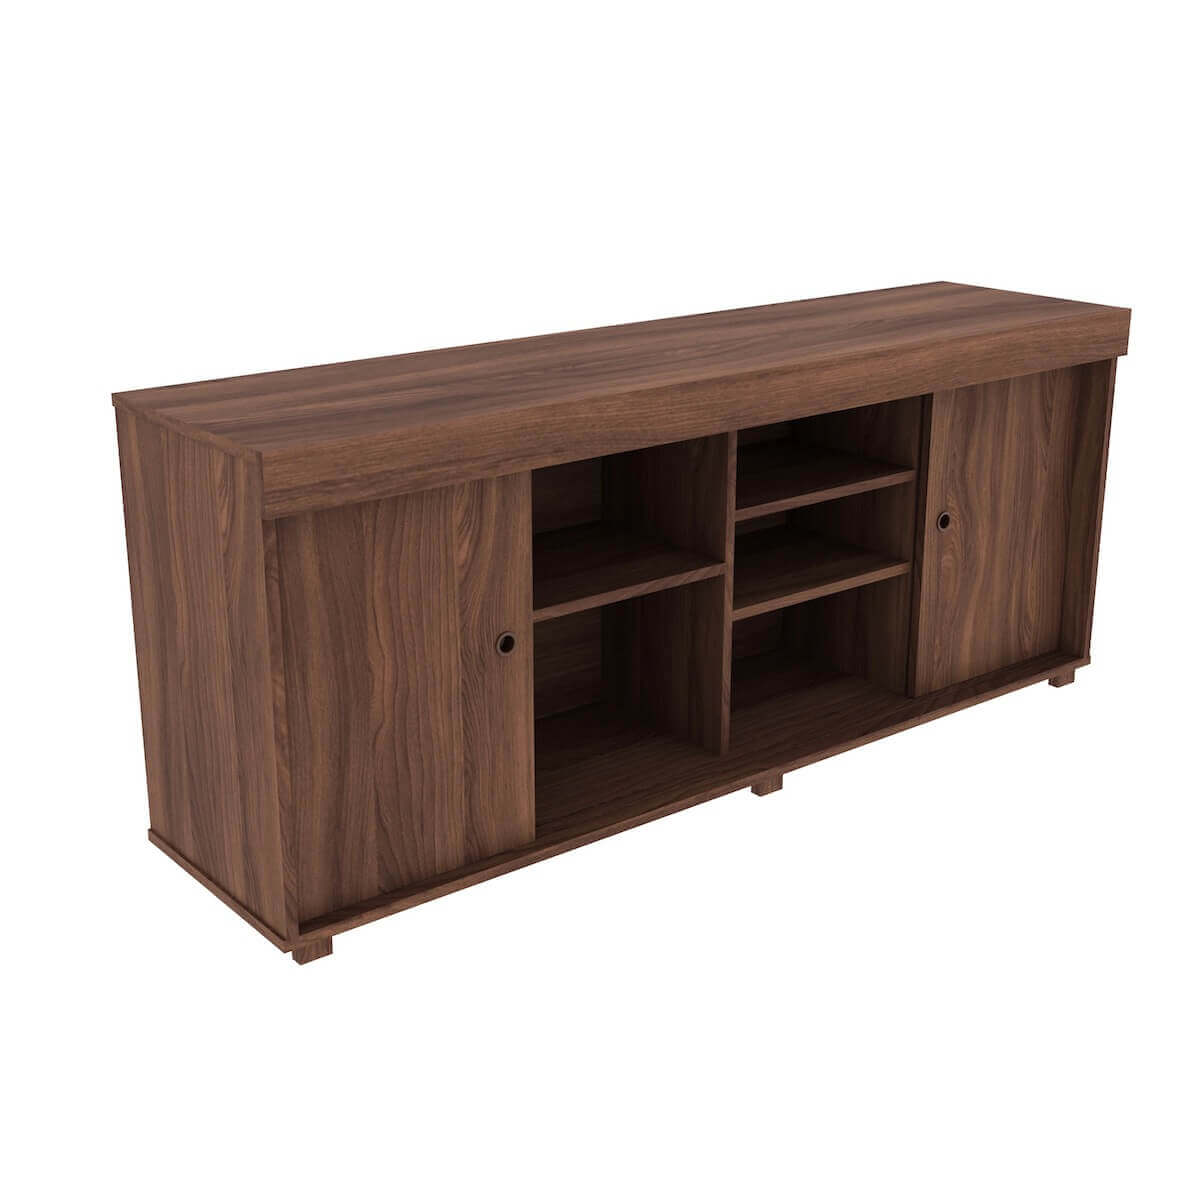 Techni Mobili Walnut TV Stand with Storage for TVs Up to 60" Side RTA-9500TV-WAL #color_walnut